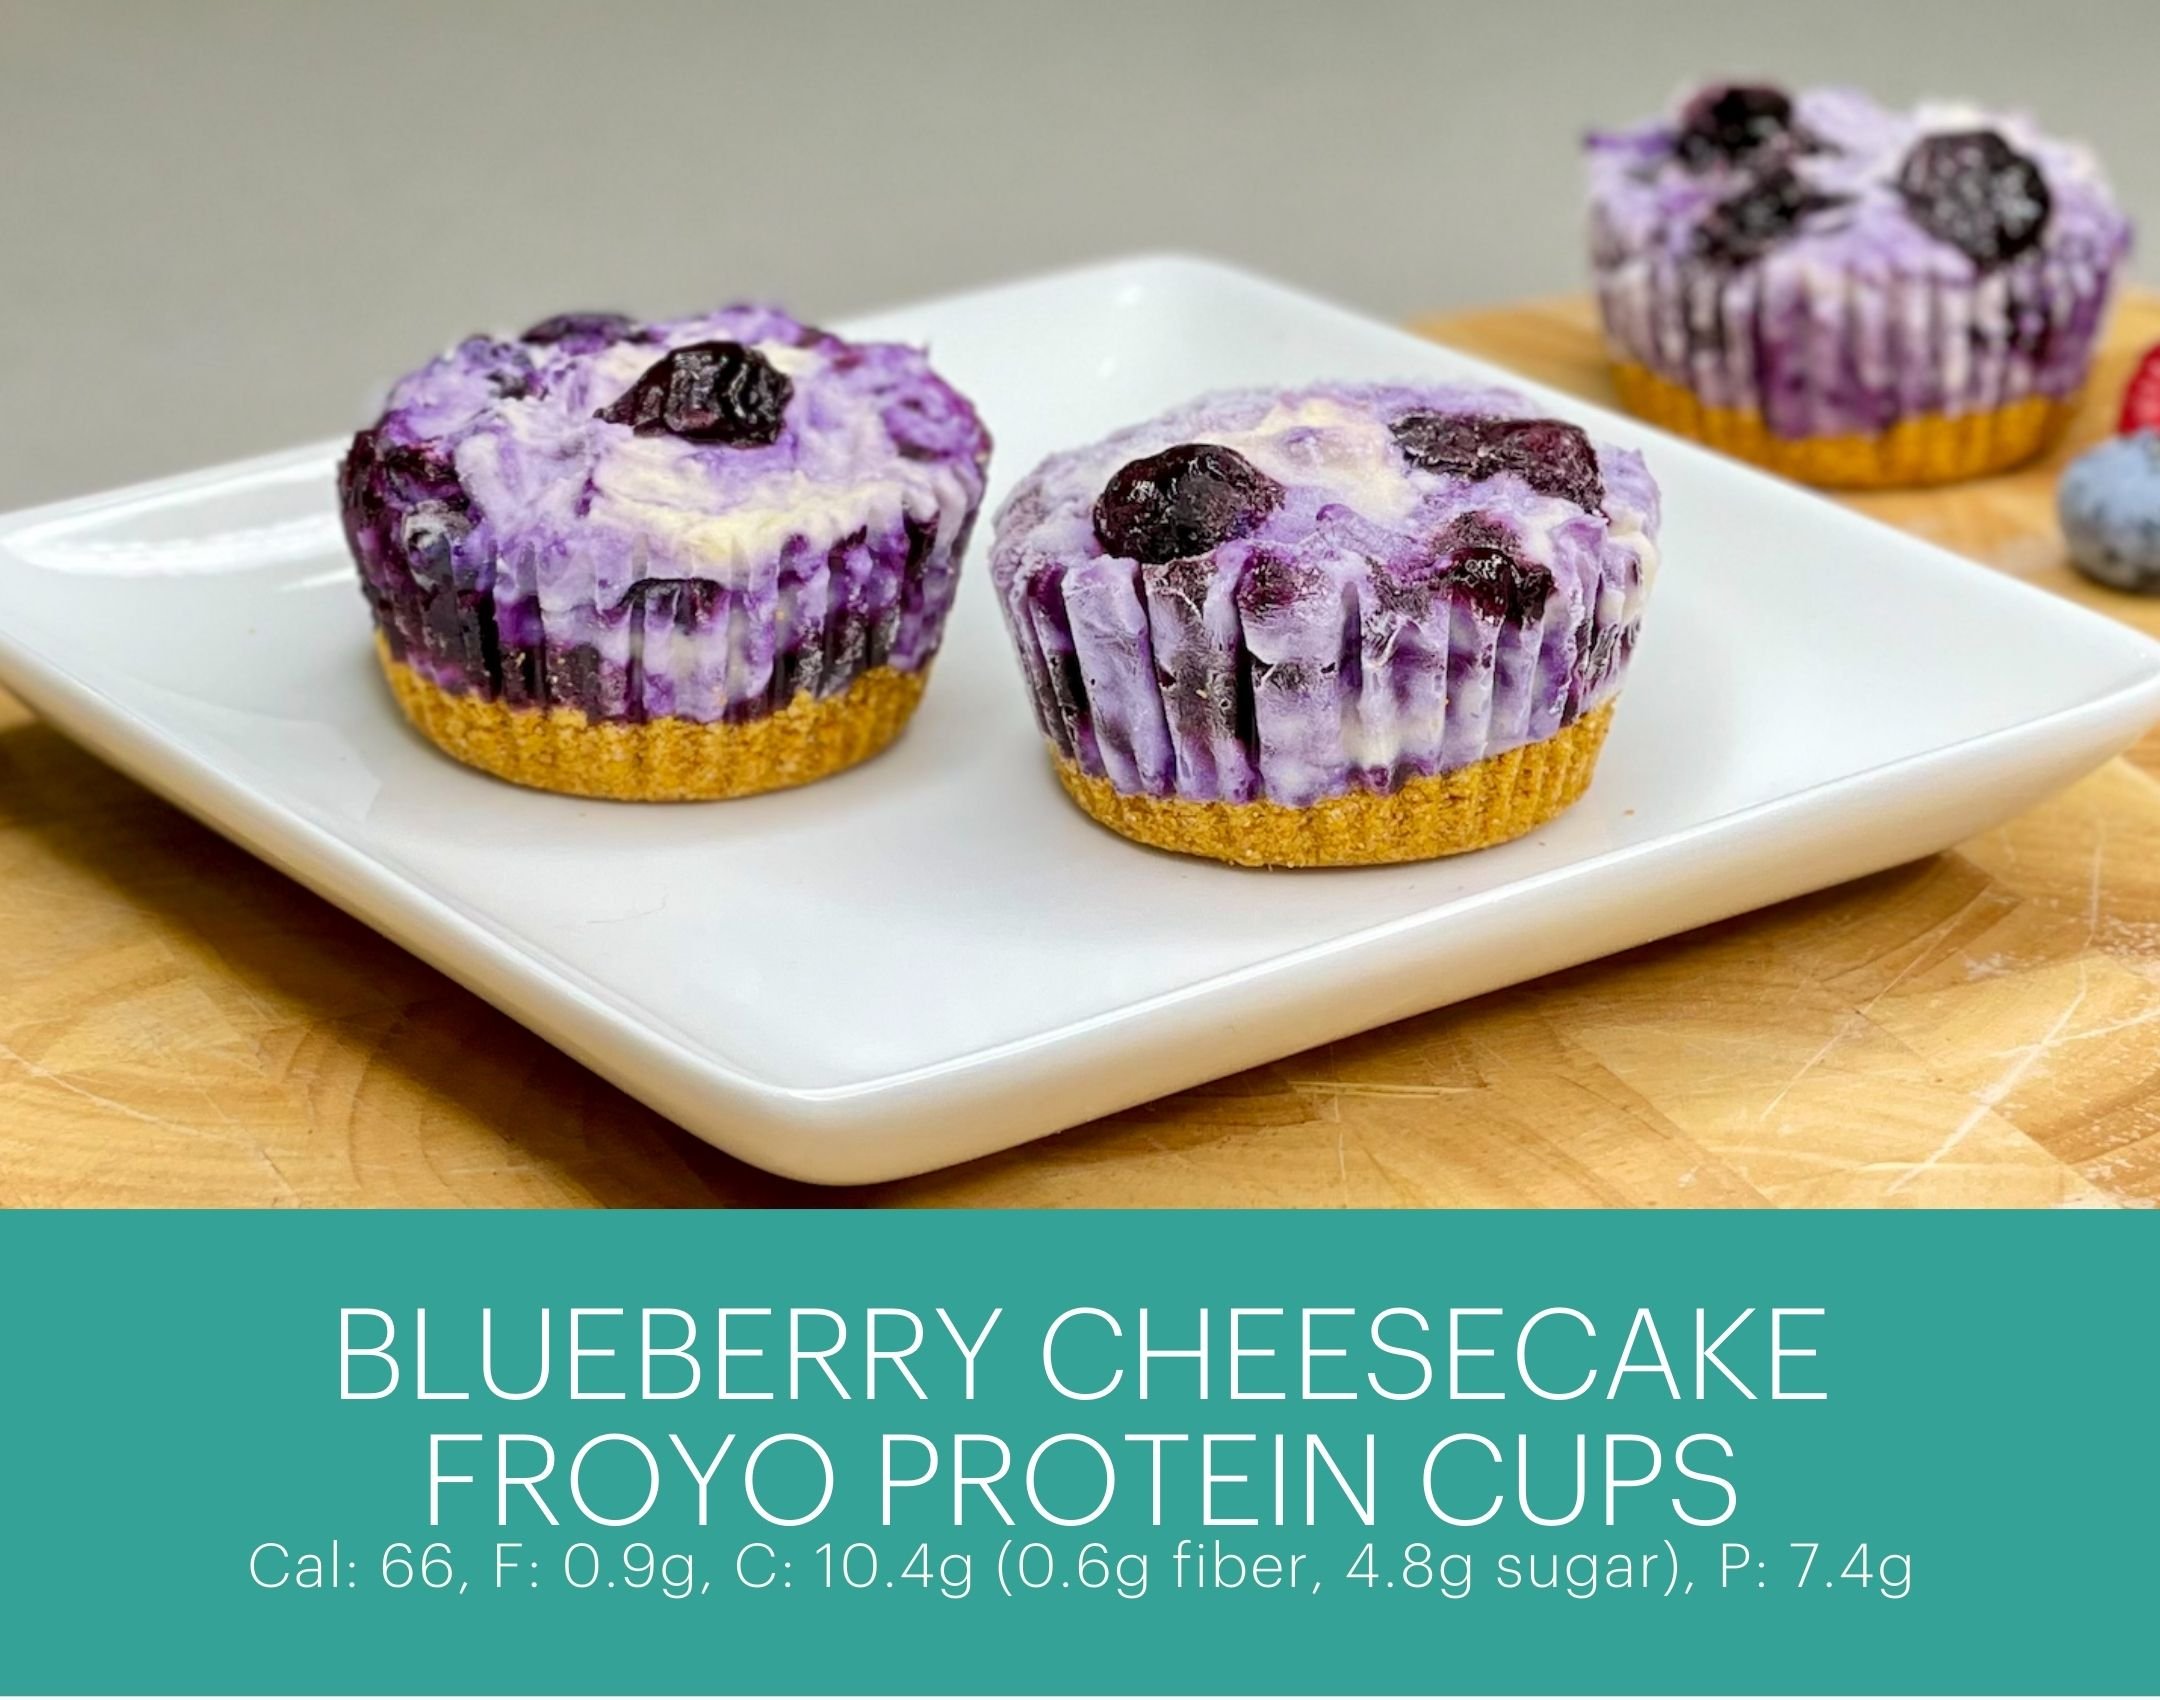 BLUEBERRY CHEESECAKE FROYO PROTEIN CUPS.jpg